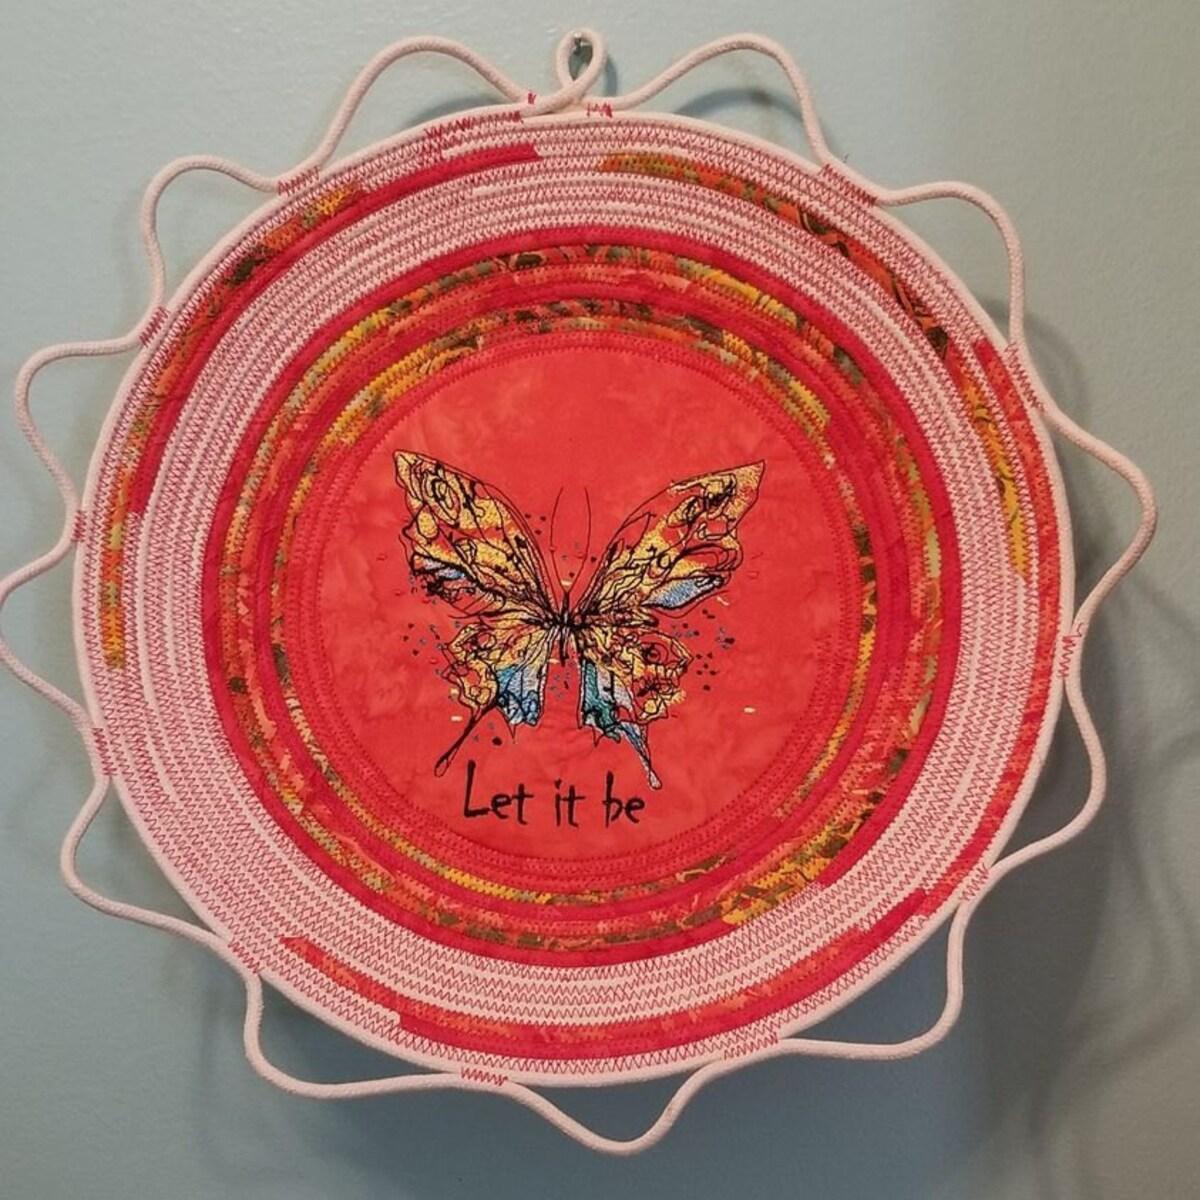 Let It Be Butterfly Embroidery Design Enhance Elegance Rope Basket